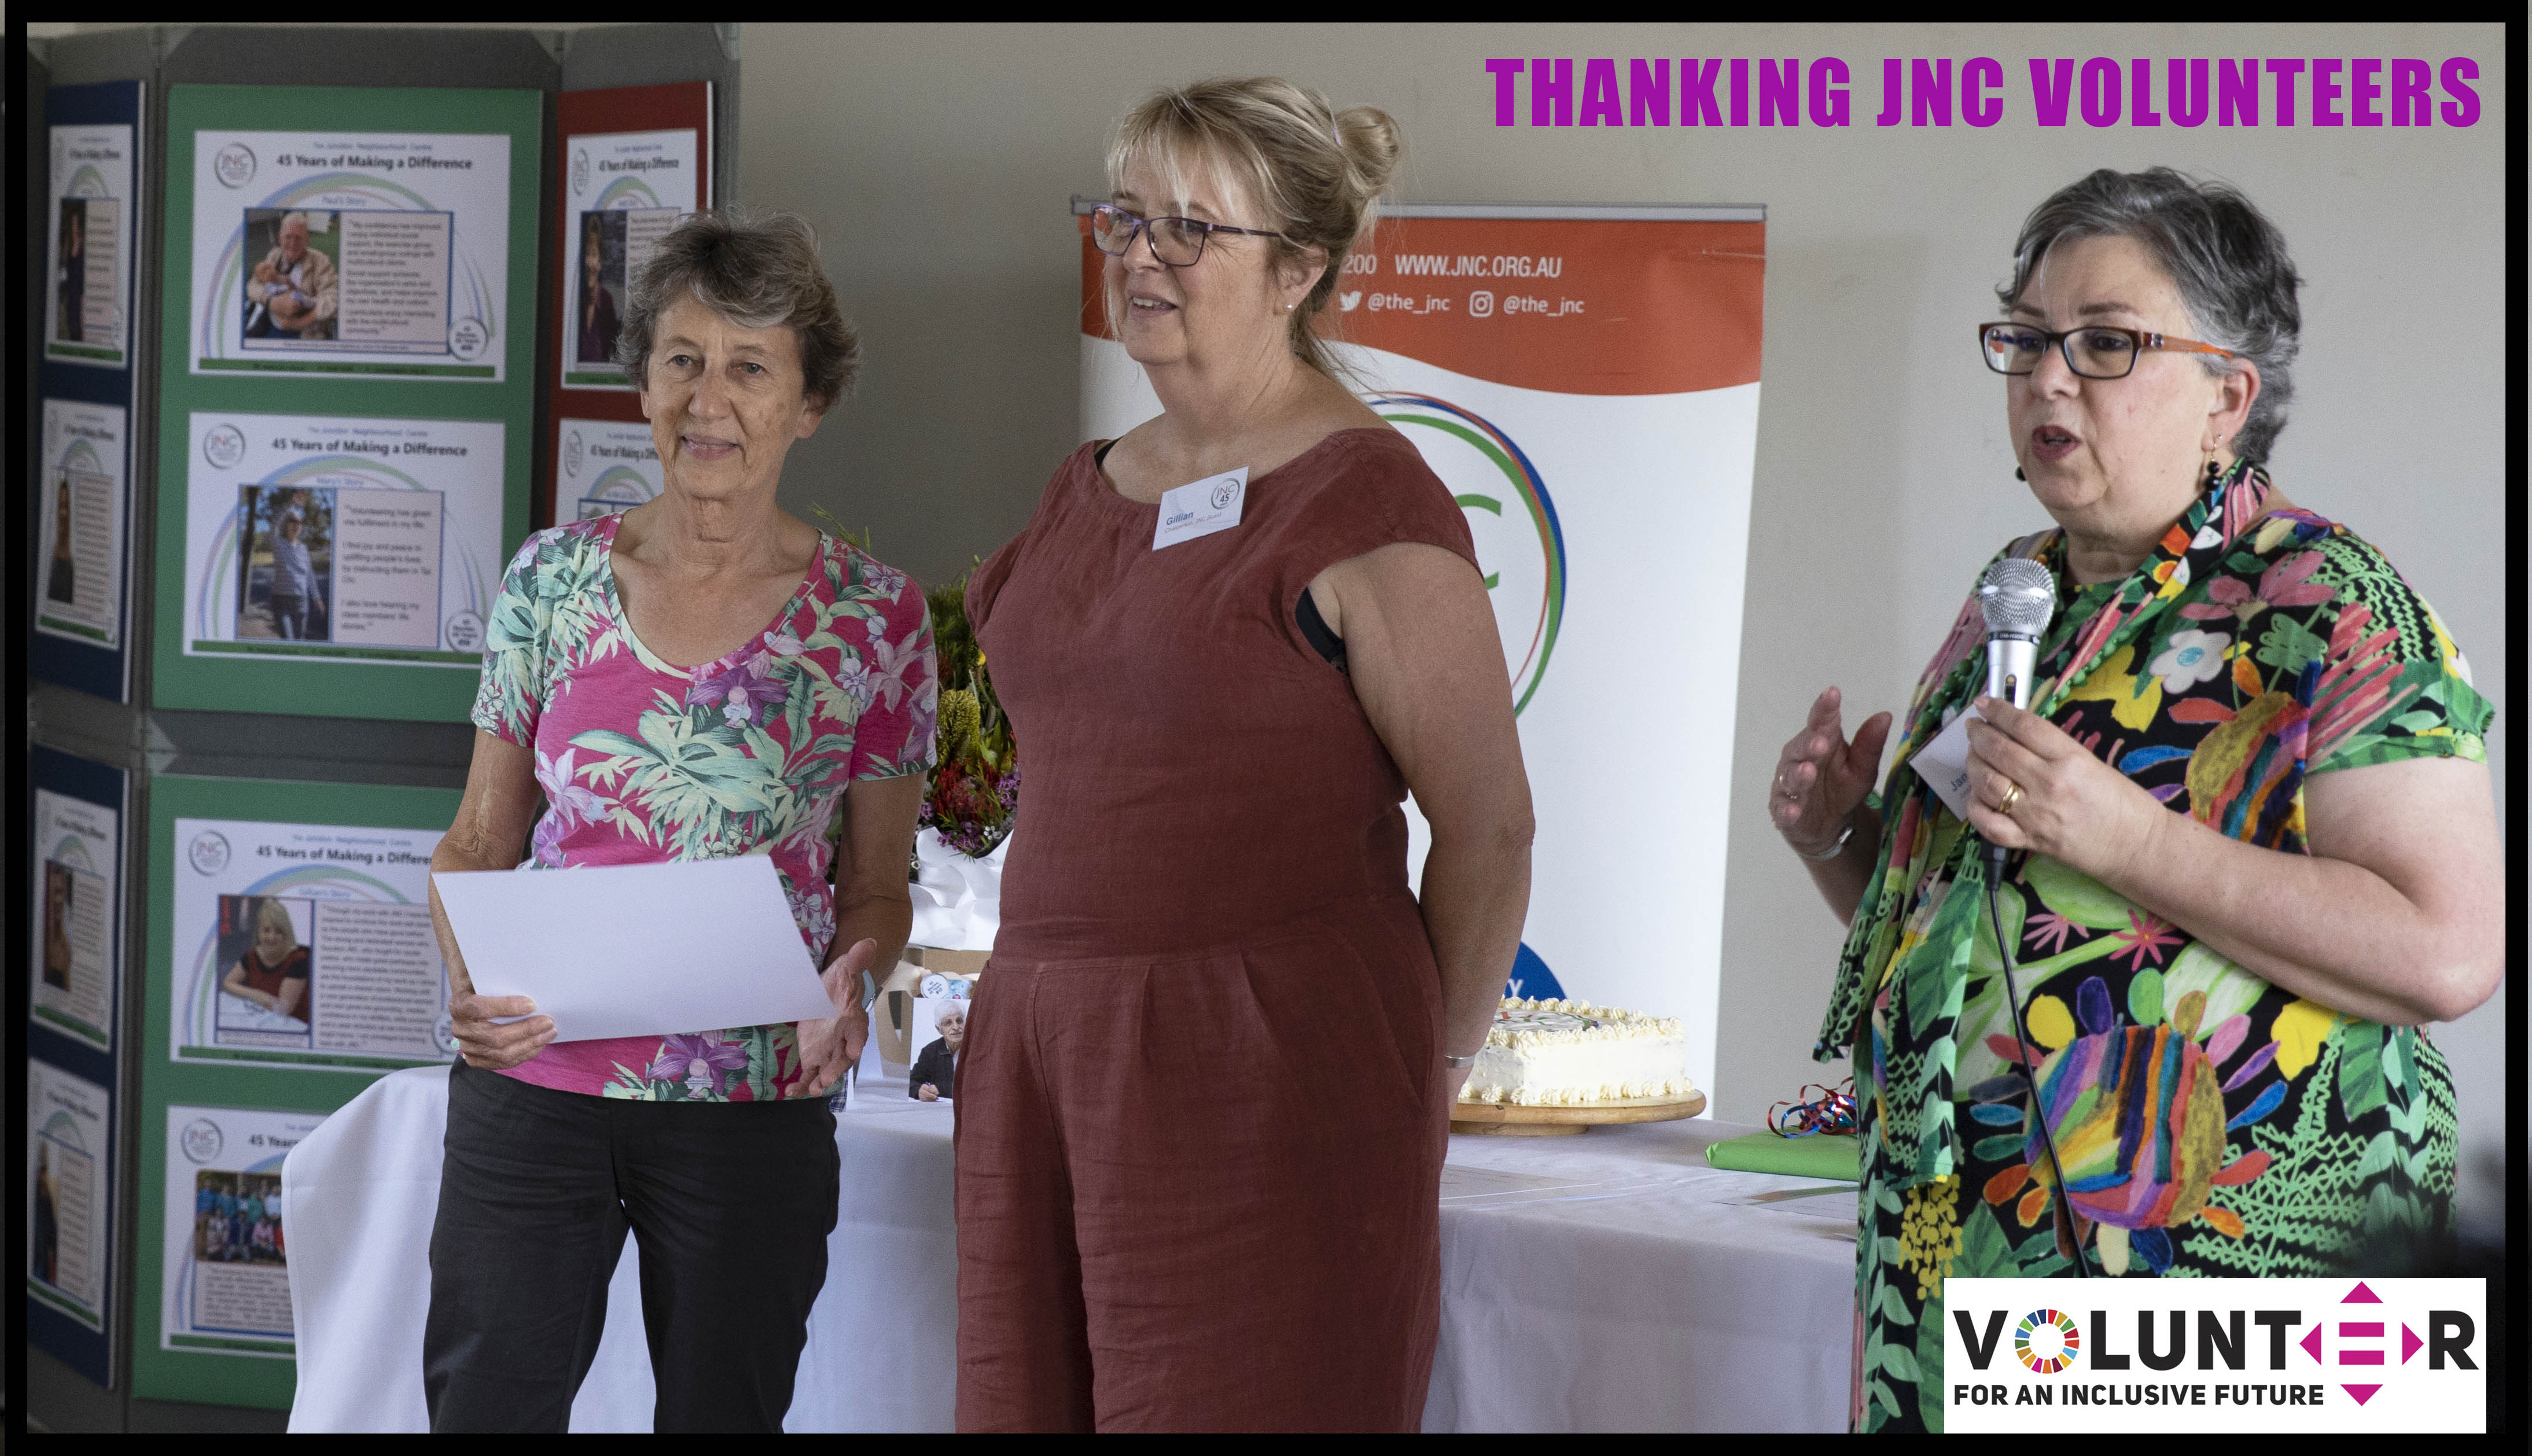 JNC Board members Janet Kidson and Gillian Elliott (Chairperson) with the JNC's General Manager Janet Green